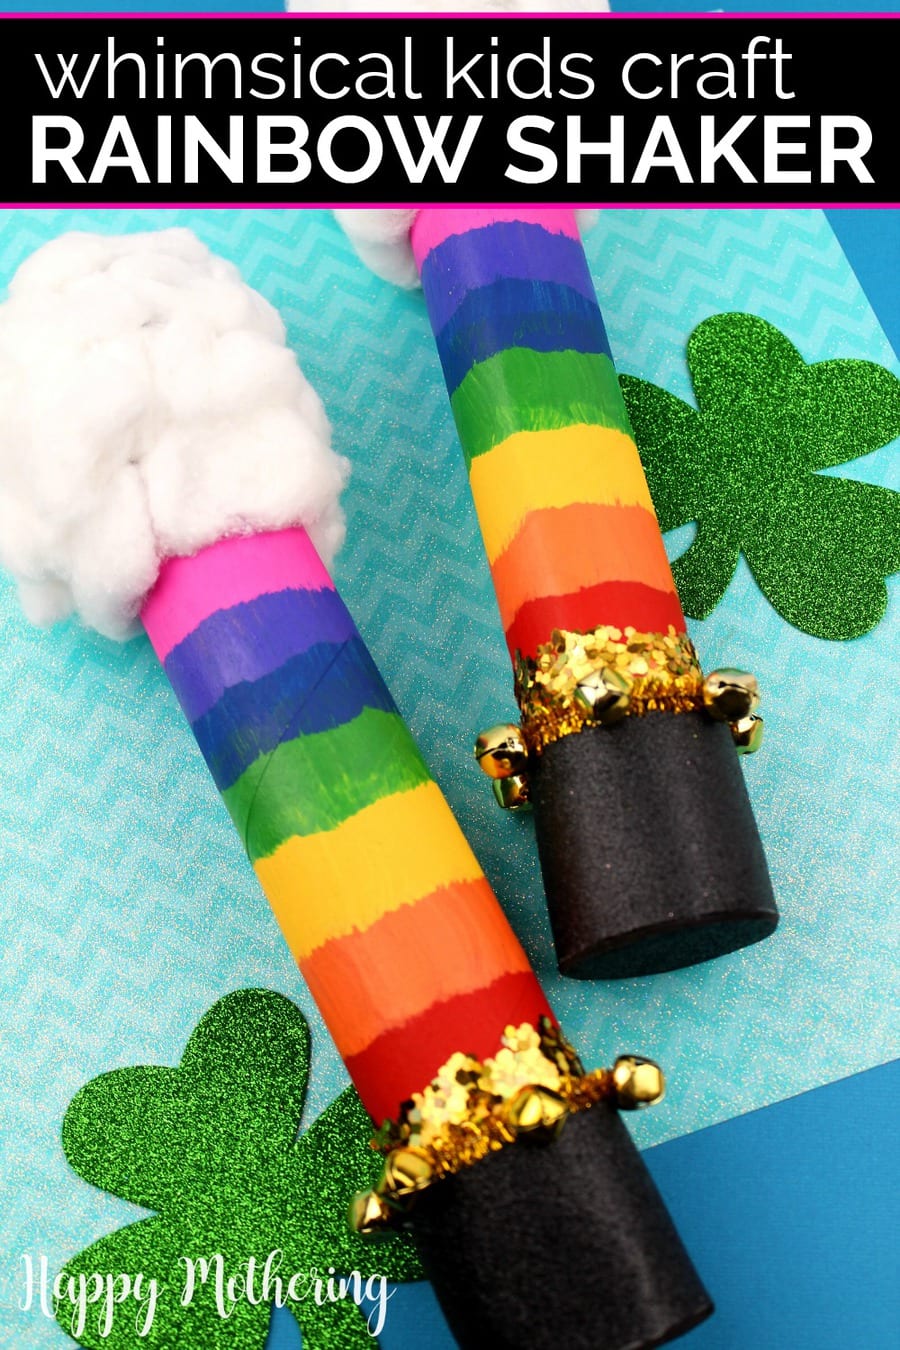 Rainbow shakers activity for kids on St. Patrick's Day